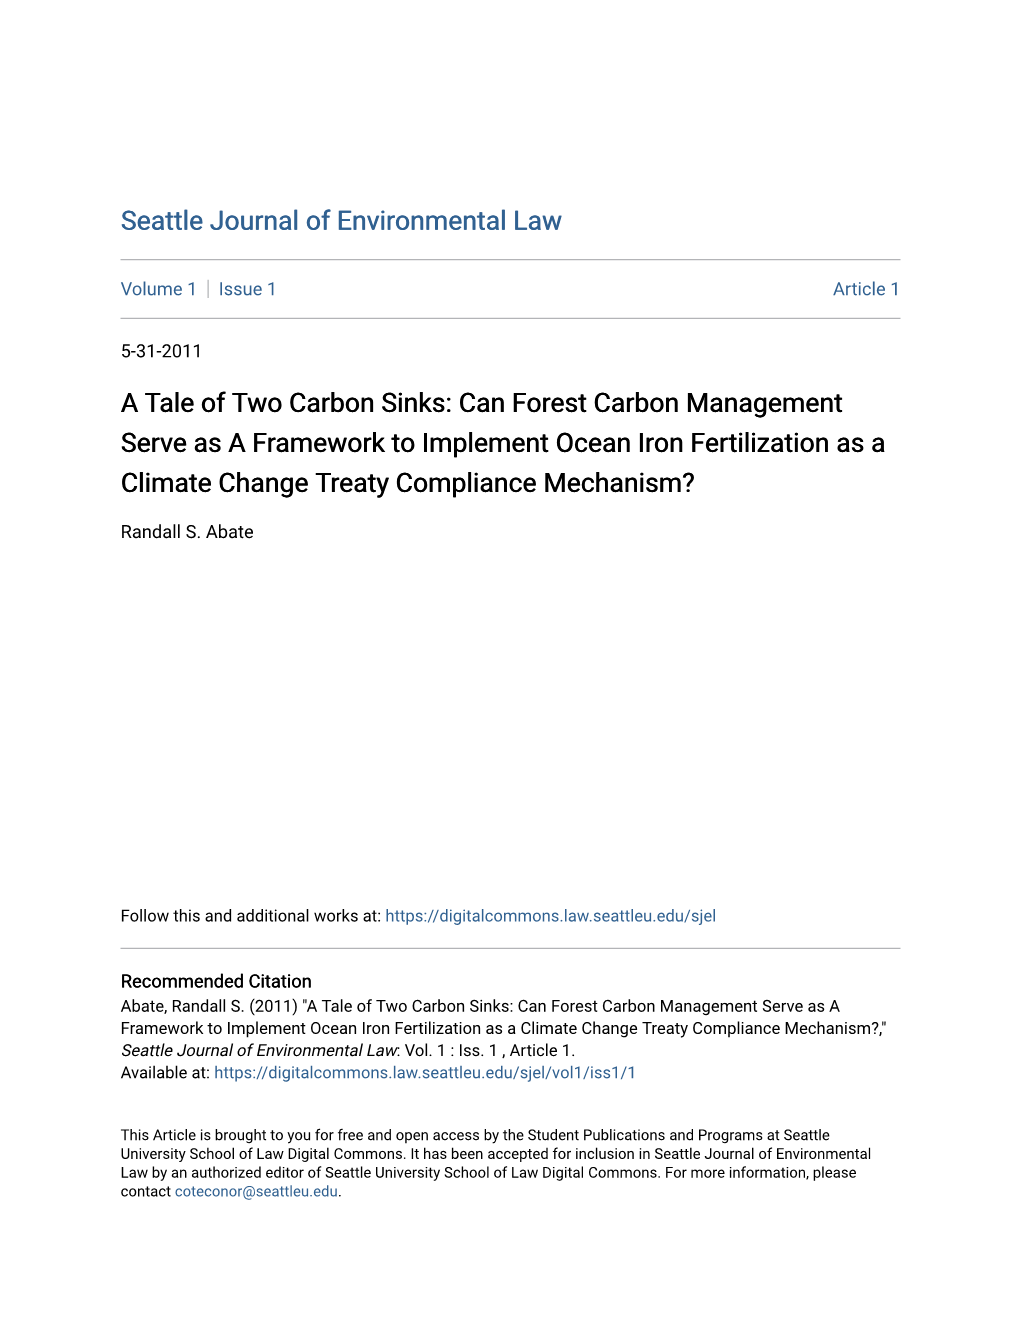 A Tale of Two Carbon Sinks: Can Forest Carbon Management Serve As a Framework to Implement Ocean Iron Fertilization As a Climate Change Treaty Compliance Mechanism?